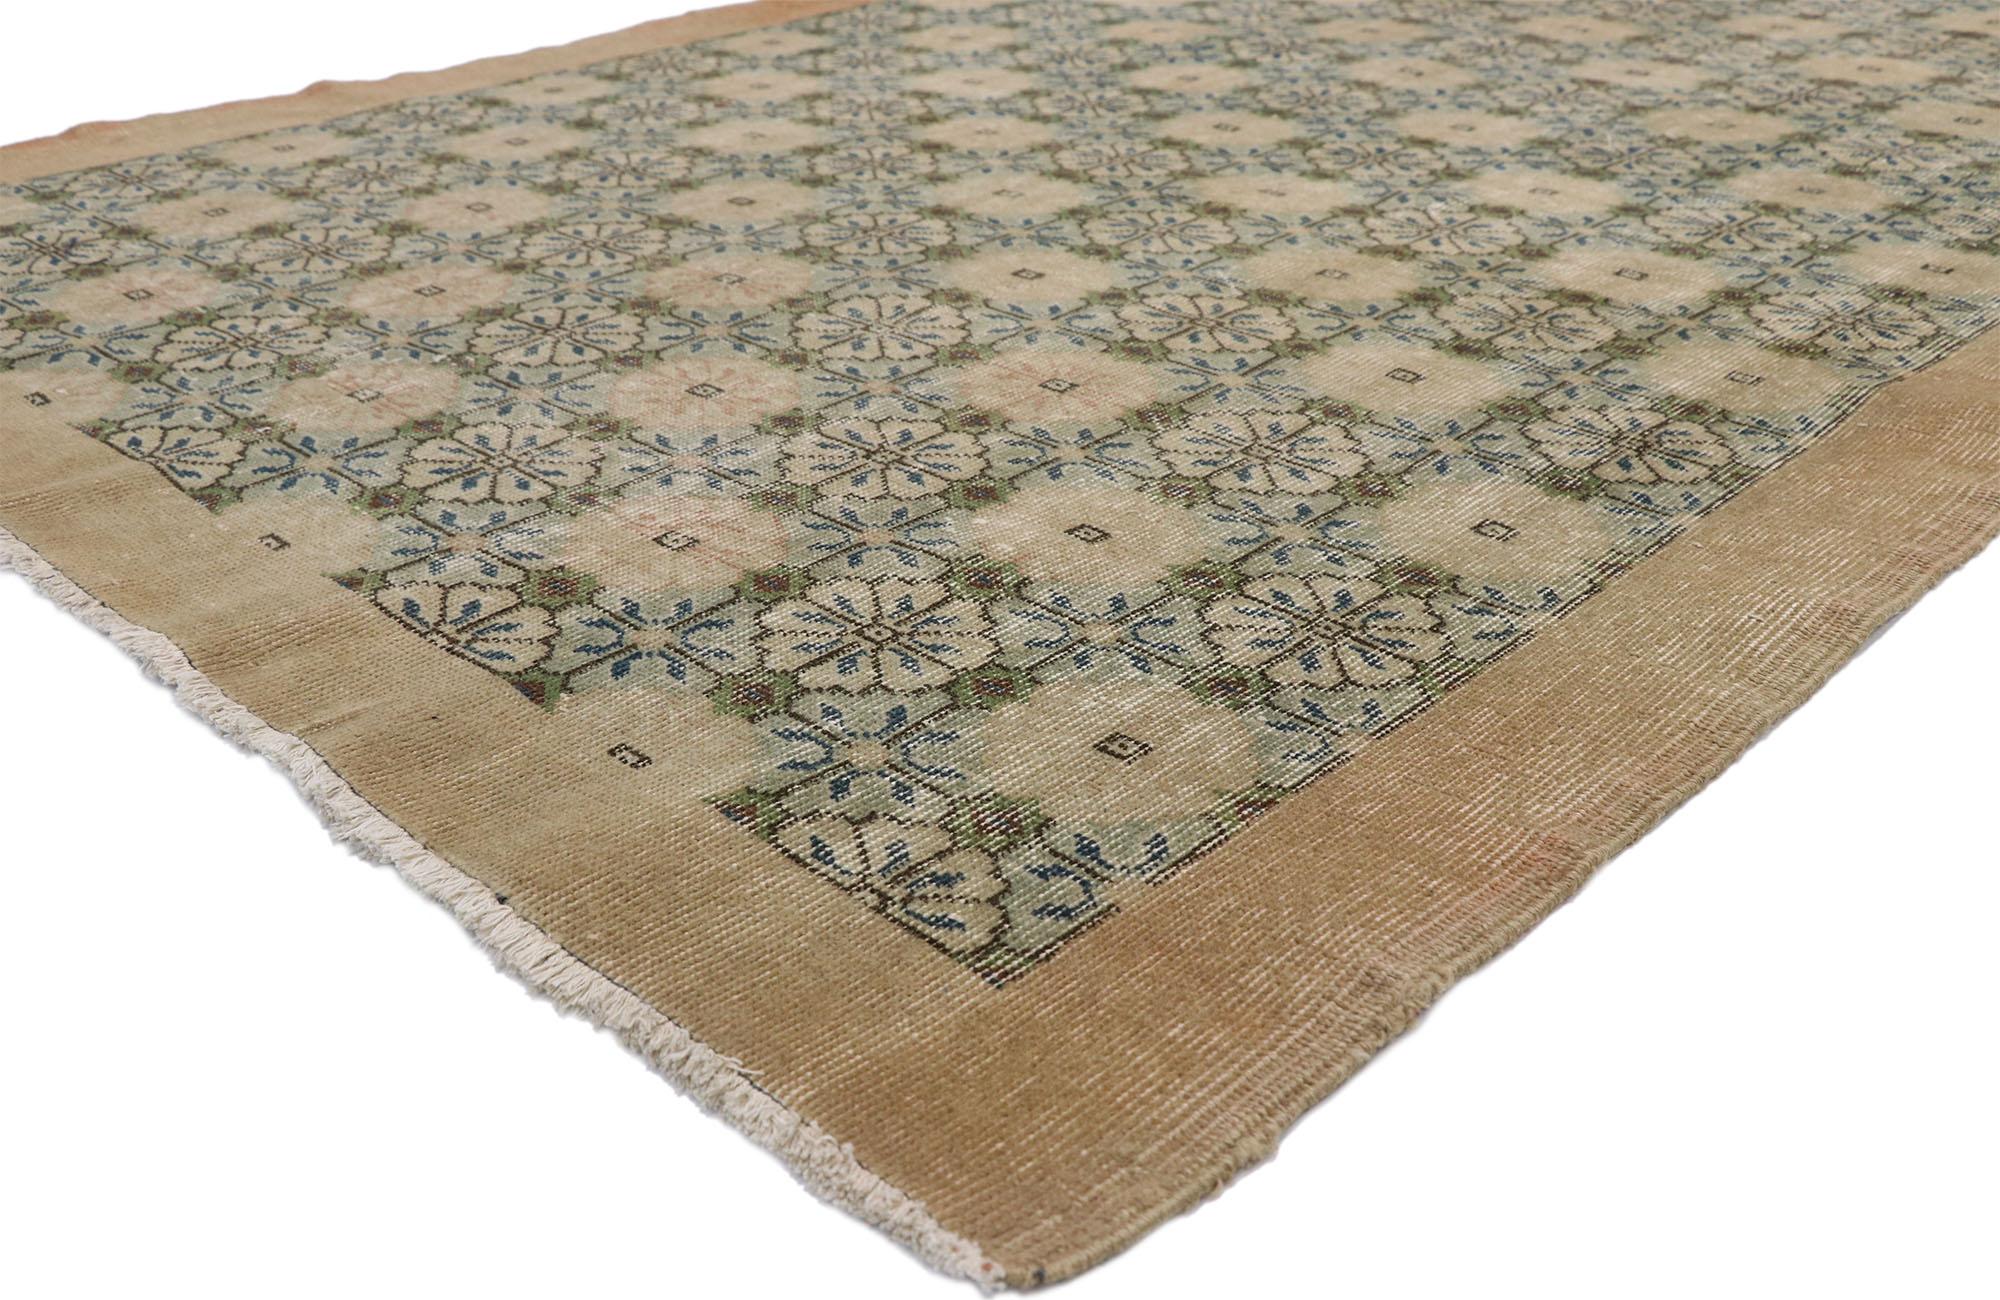 52570 Zeki Muren distressed vintage Turkish Sivas rug with Swedish cottage Gustavian style. Lovingly timeworn with Gustavian grace, this hand knotted wool distressed Turkish Sivas rug beautifully embodies a Swedish Farmhouse style. The field is